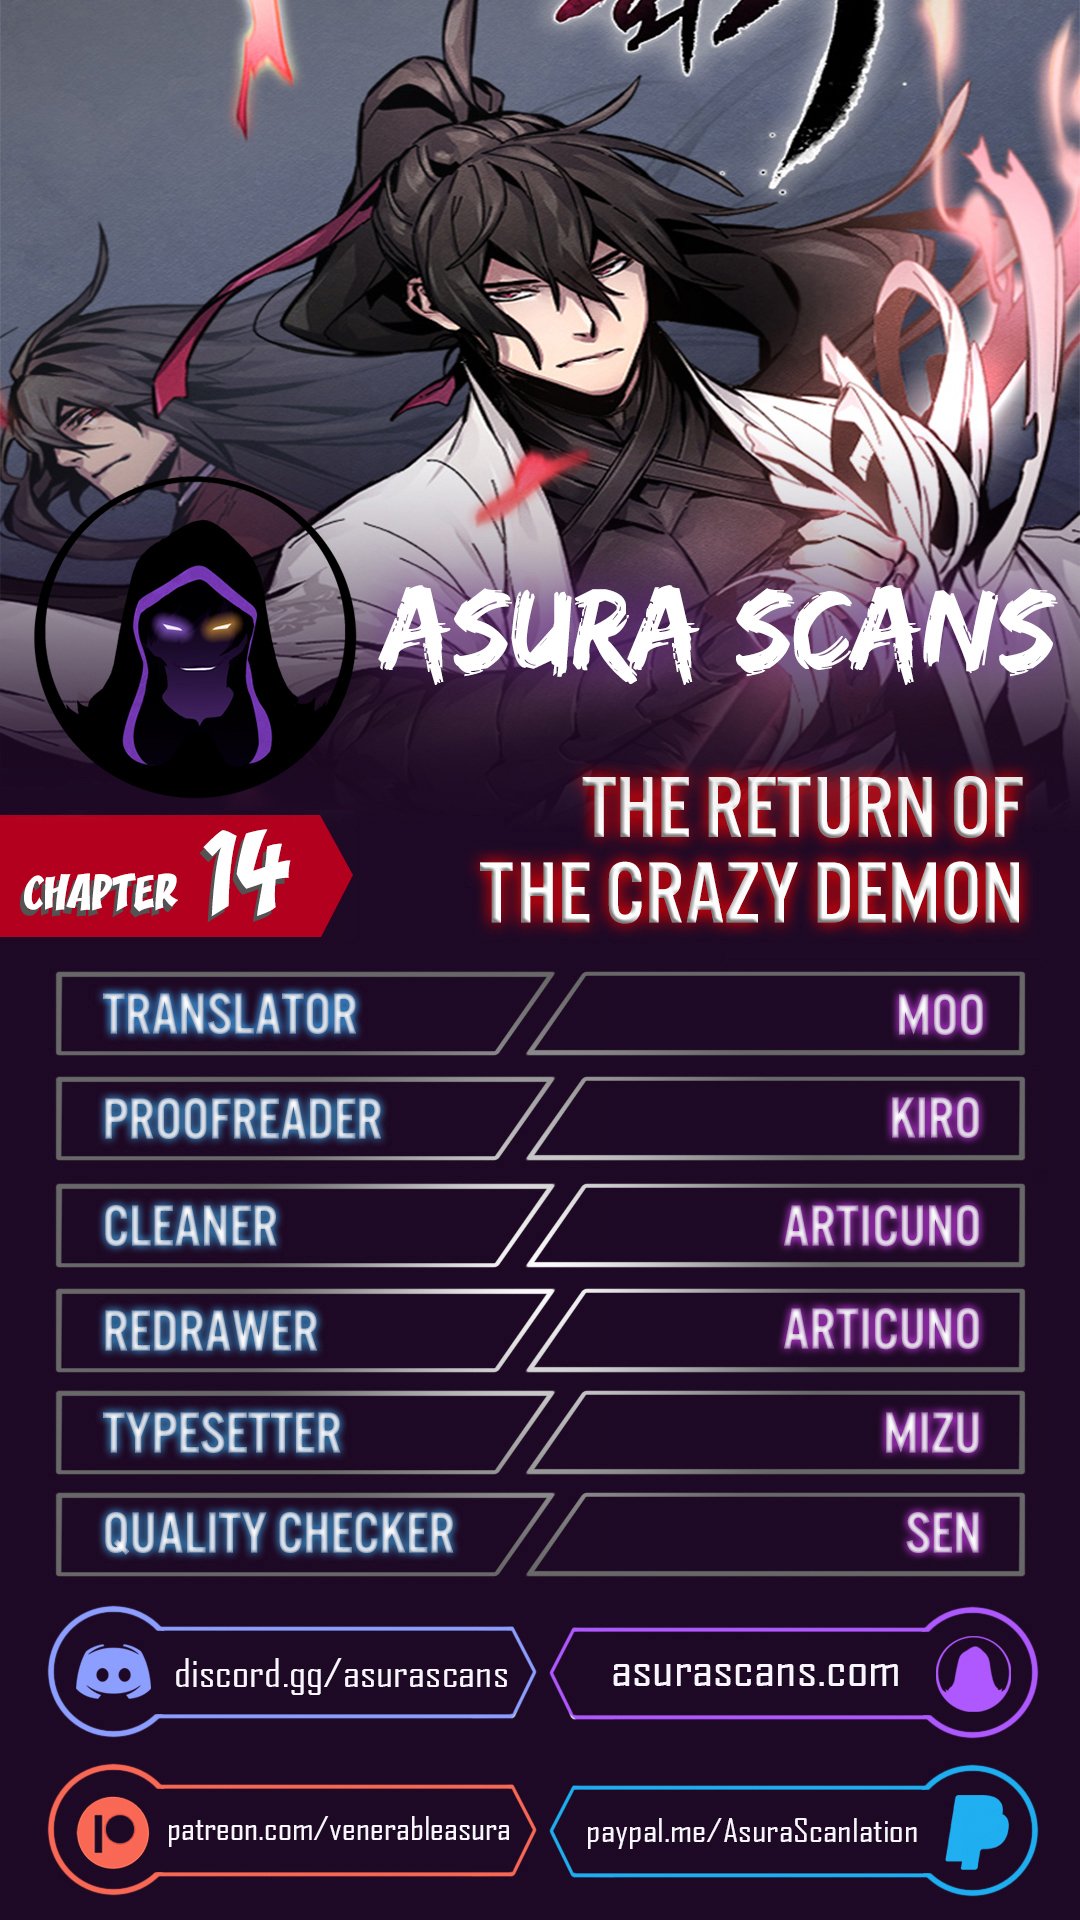 The Return of the Crazy Demon - Chapter 18555 - Image 1